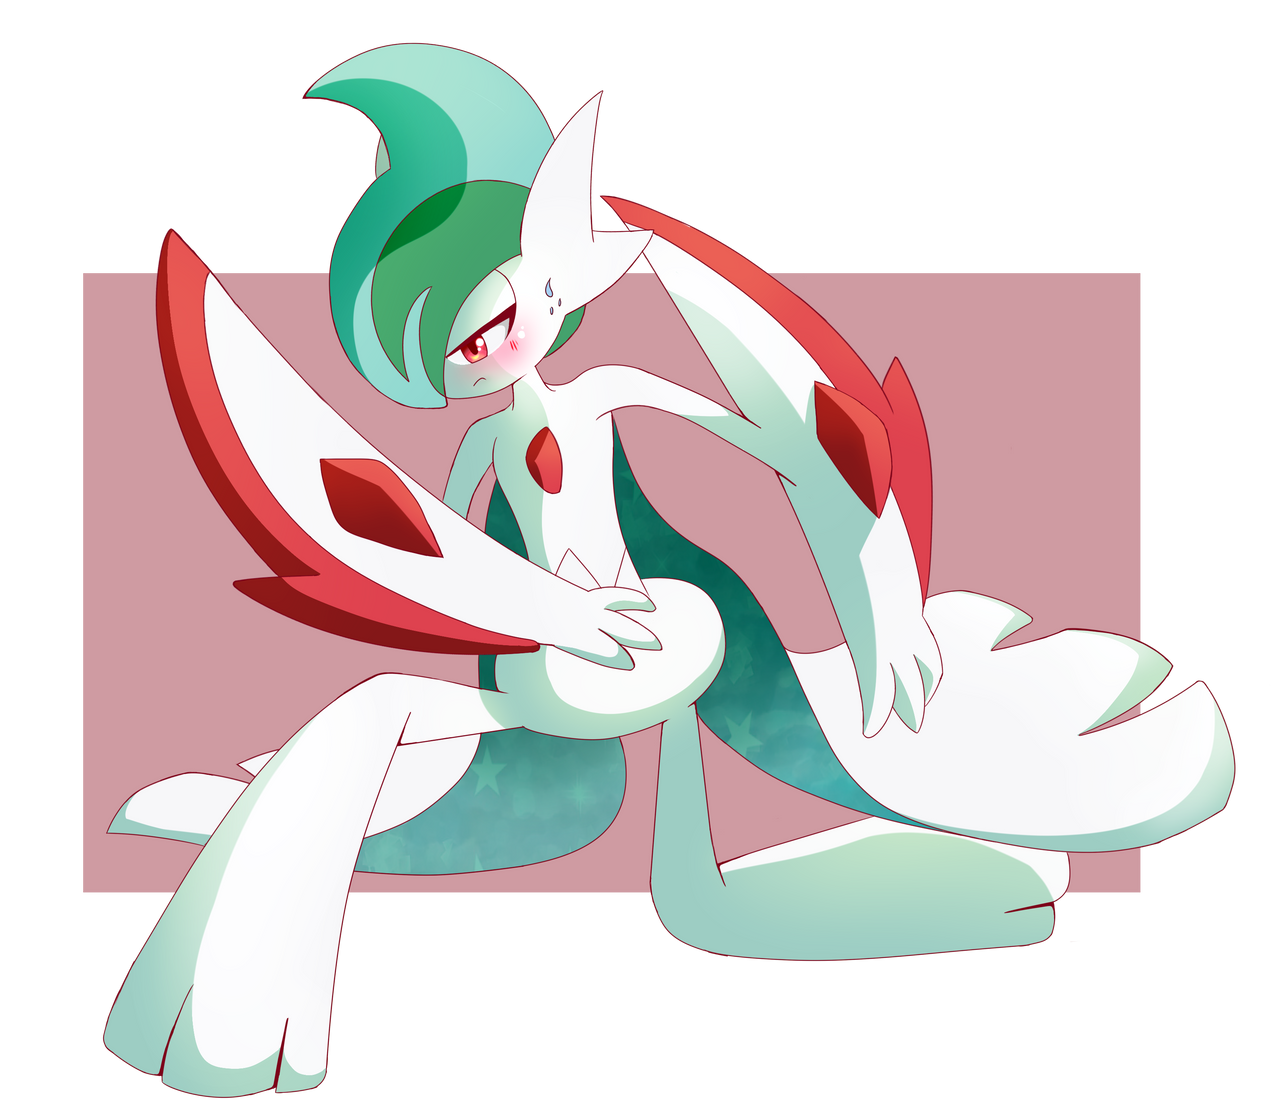 mega_gallade_by_jonke_s-d7zs9ky.png